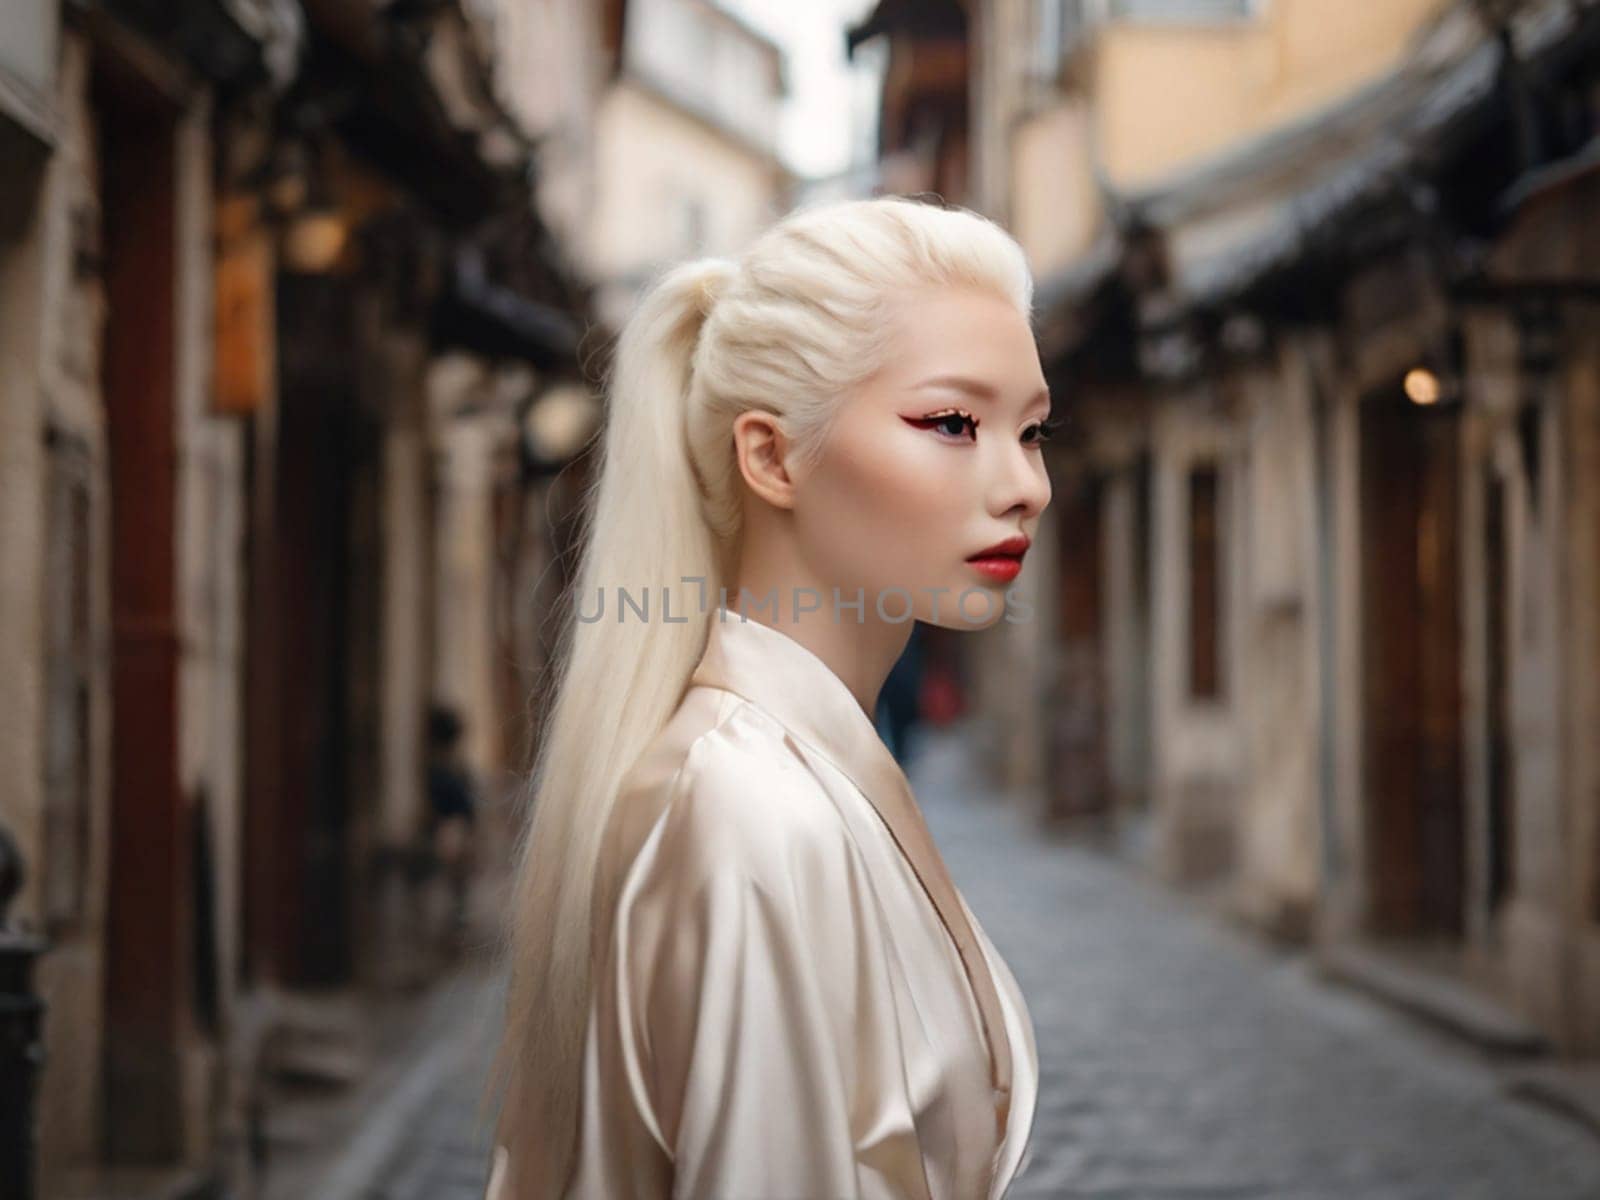 an albino girl of Asian appearance walks along narrow streets with cobblestones.